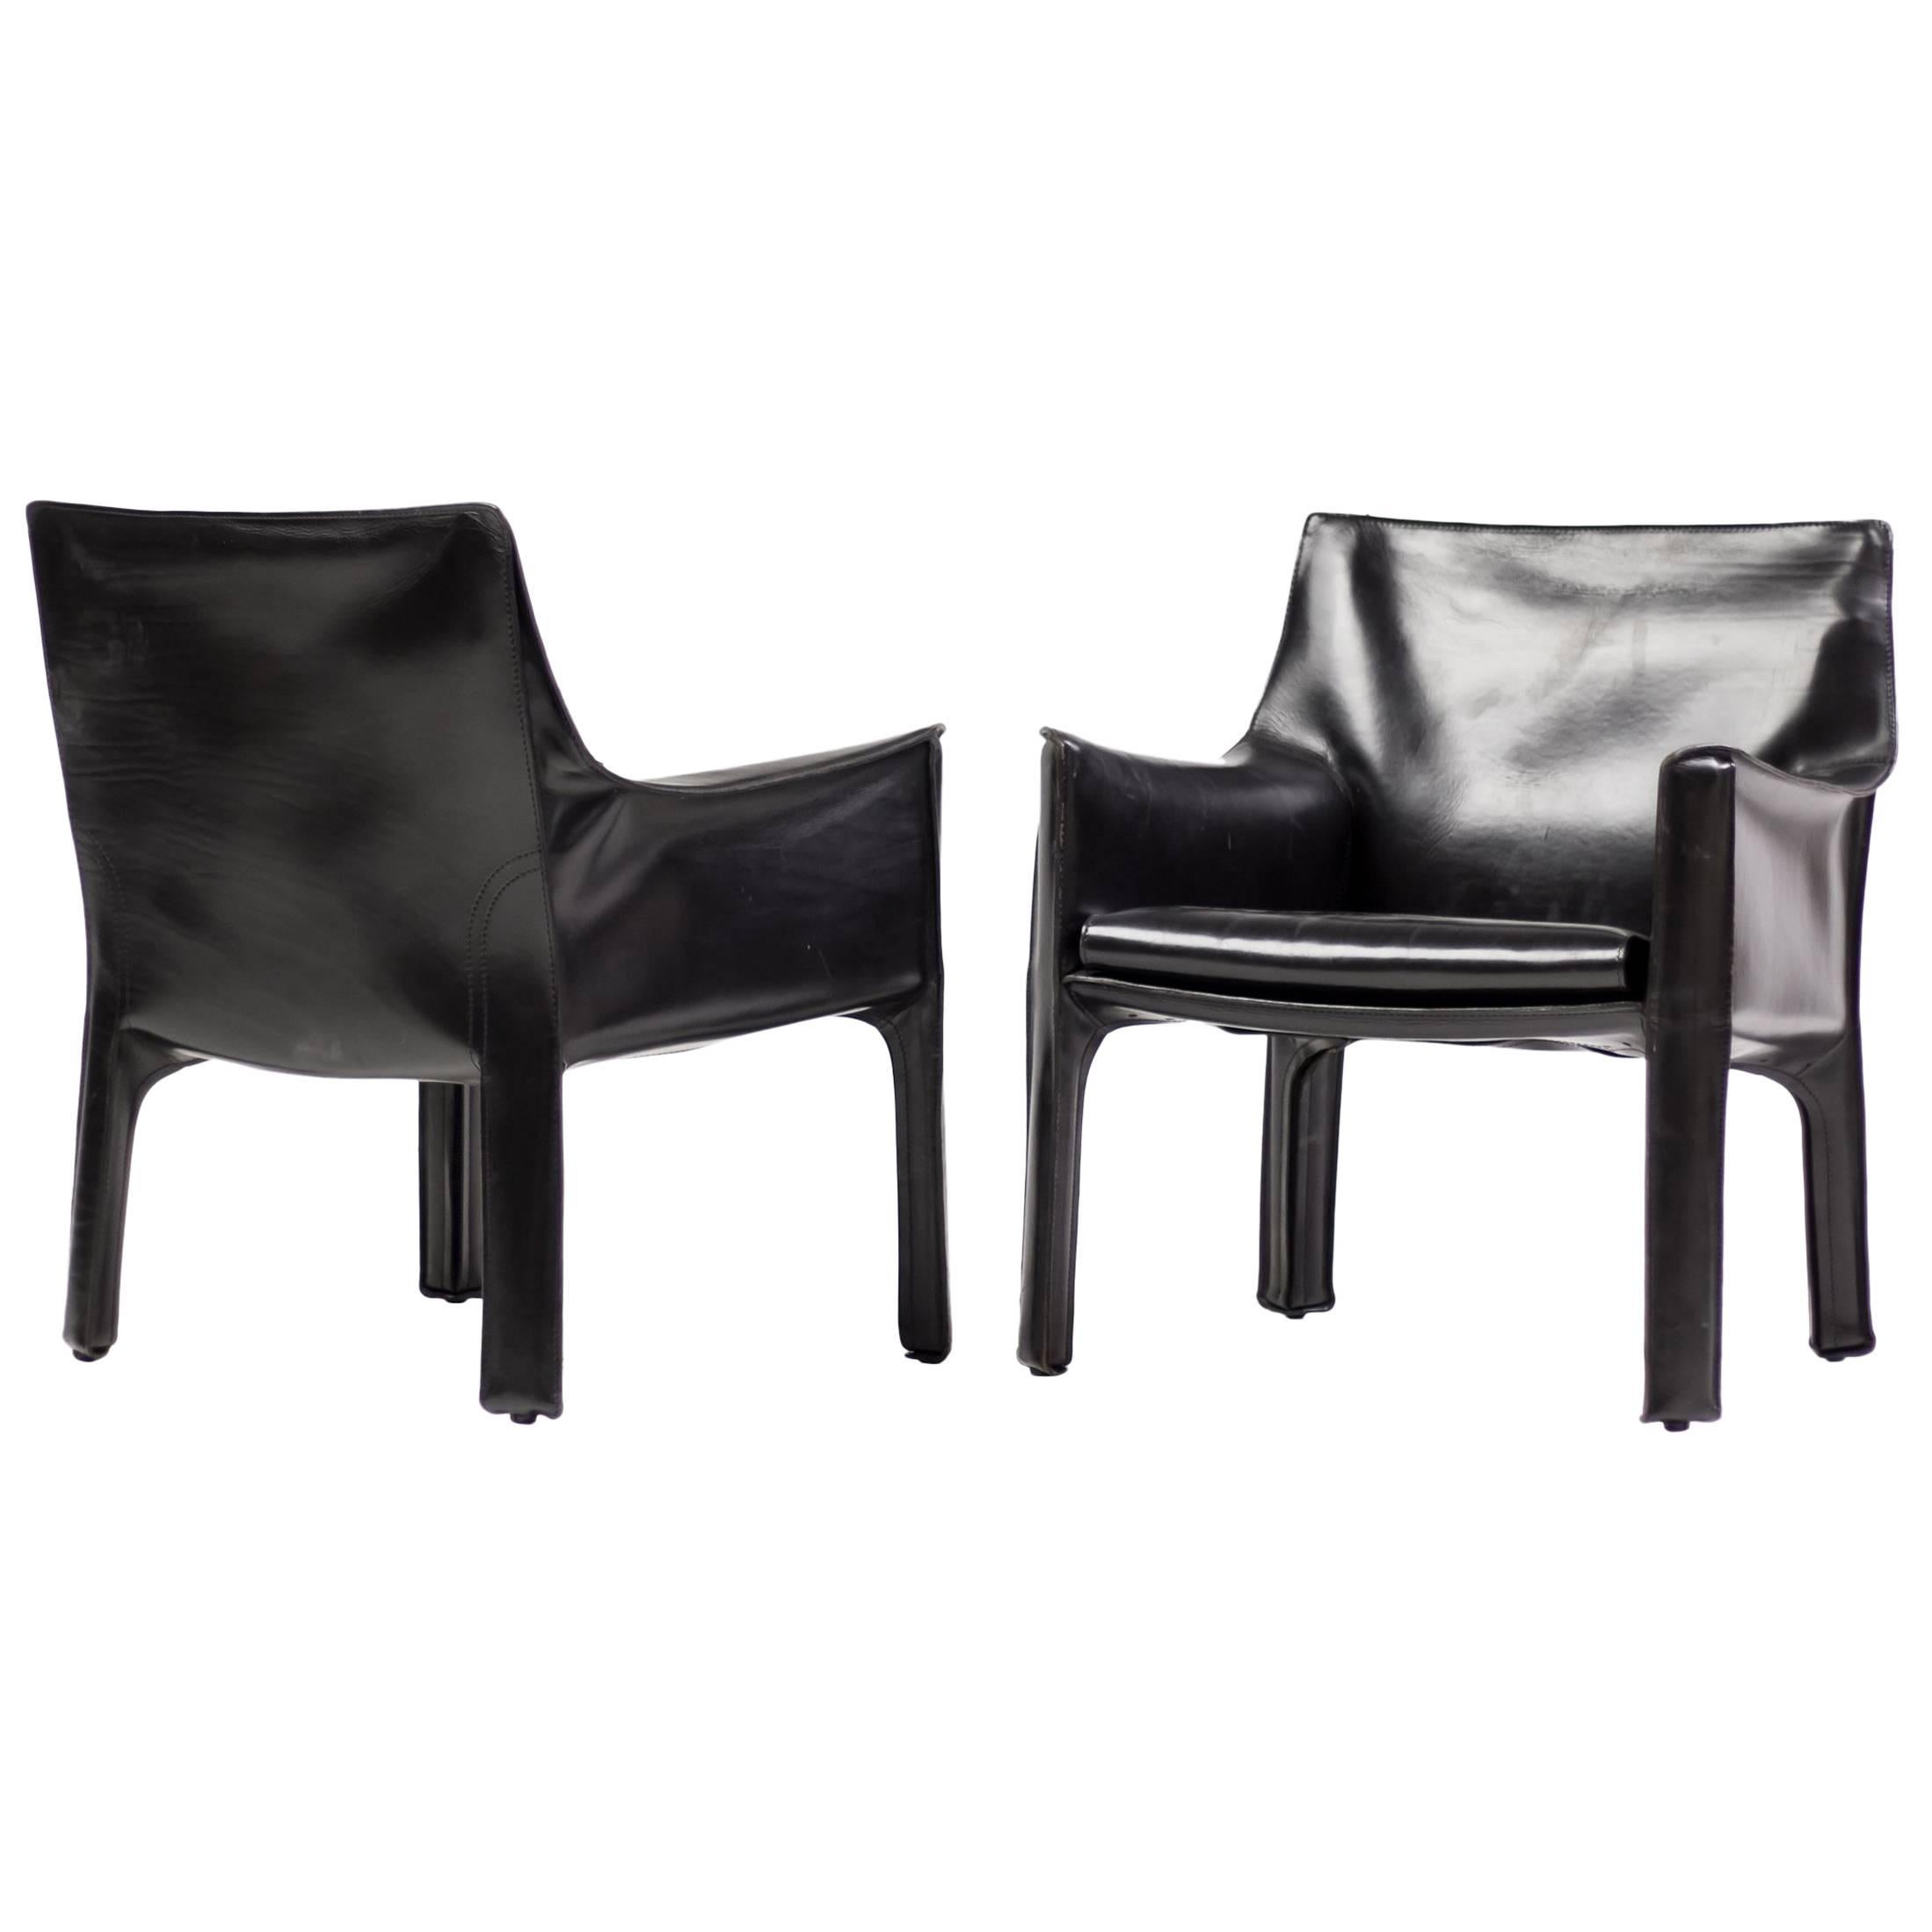 Pair of Cassina Cab Lounge Chairs by Mario Bellini